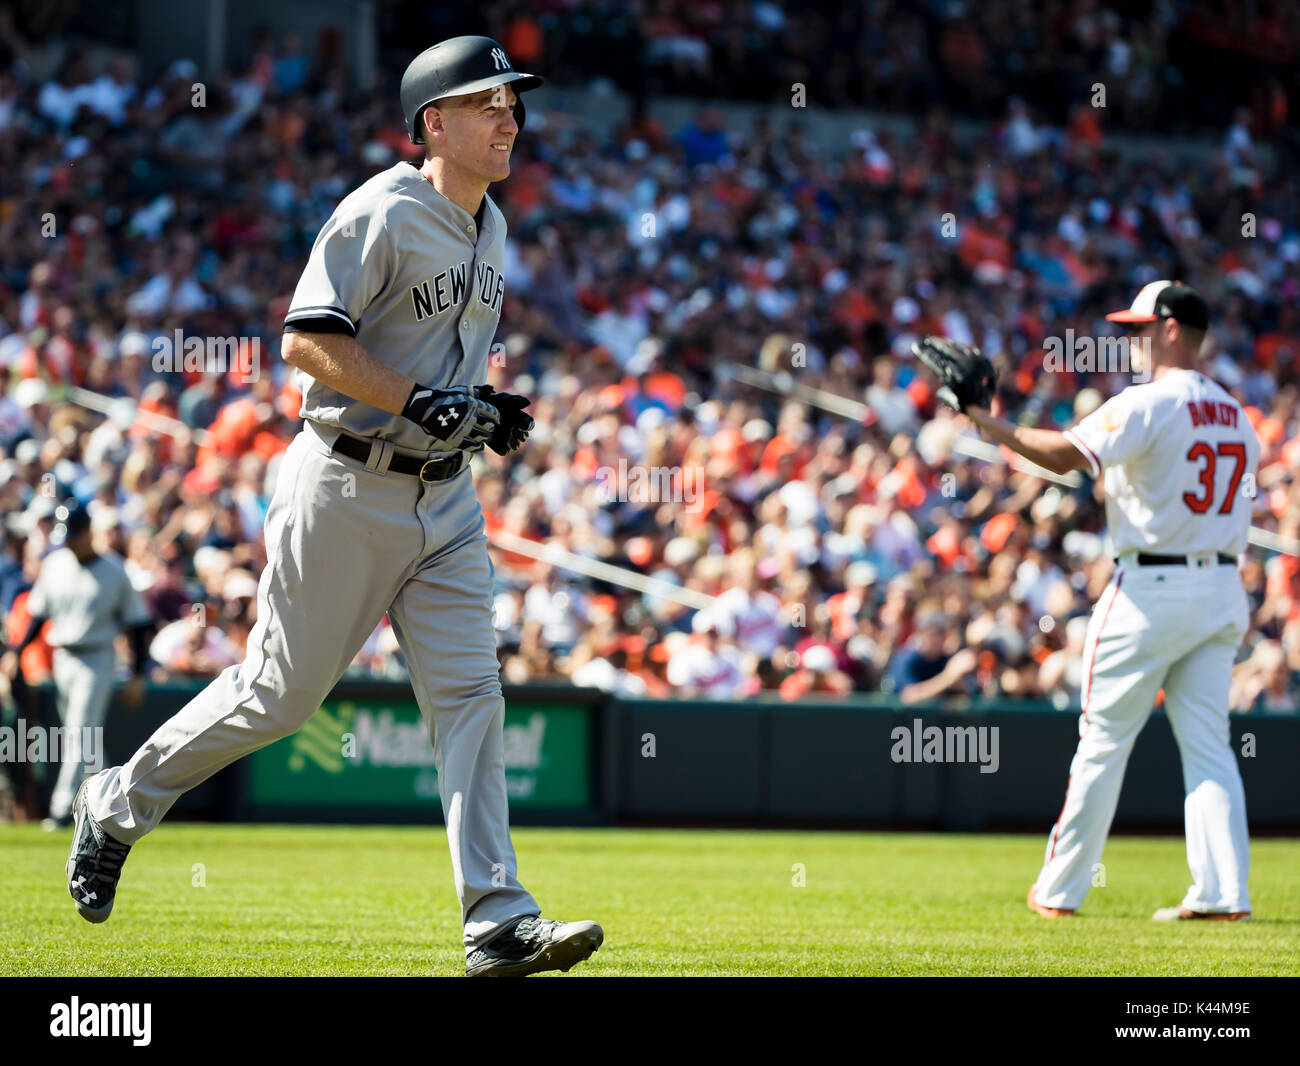 Baltimore, Maryland, USA. 04th Sep, 2017. New York Yankees third baseman Todd Frazier (29) is walked by Baltimore Orioles starting pitcher Dylan Bundy (37) during MLB game between New York Yankees and Baltimore Orioles at Oriole Park at Camden Yards in Baltimore, Maryland. Scott Taetsch/CSM/Alamy Live News Stock Photo